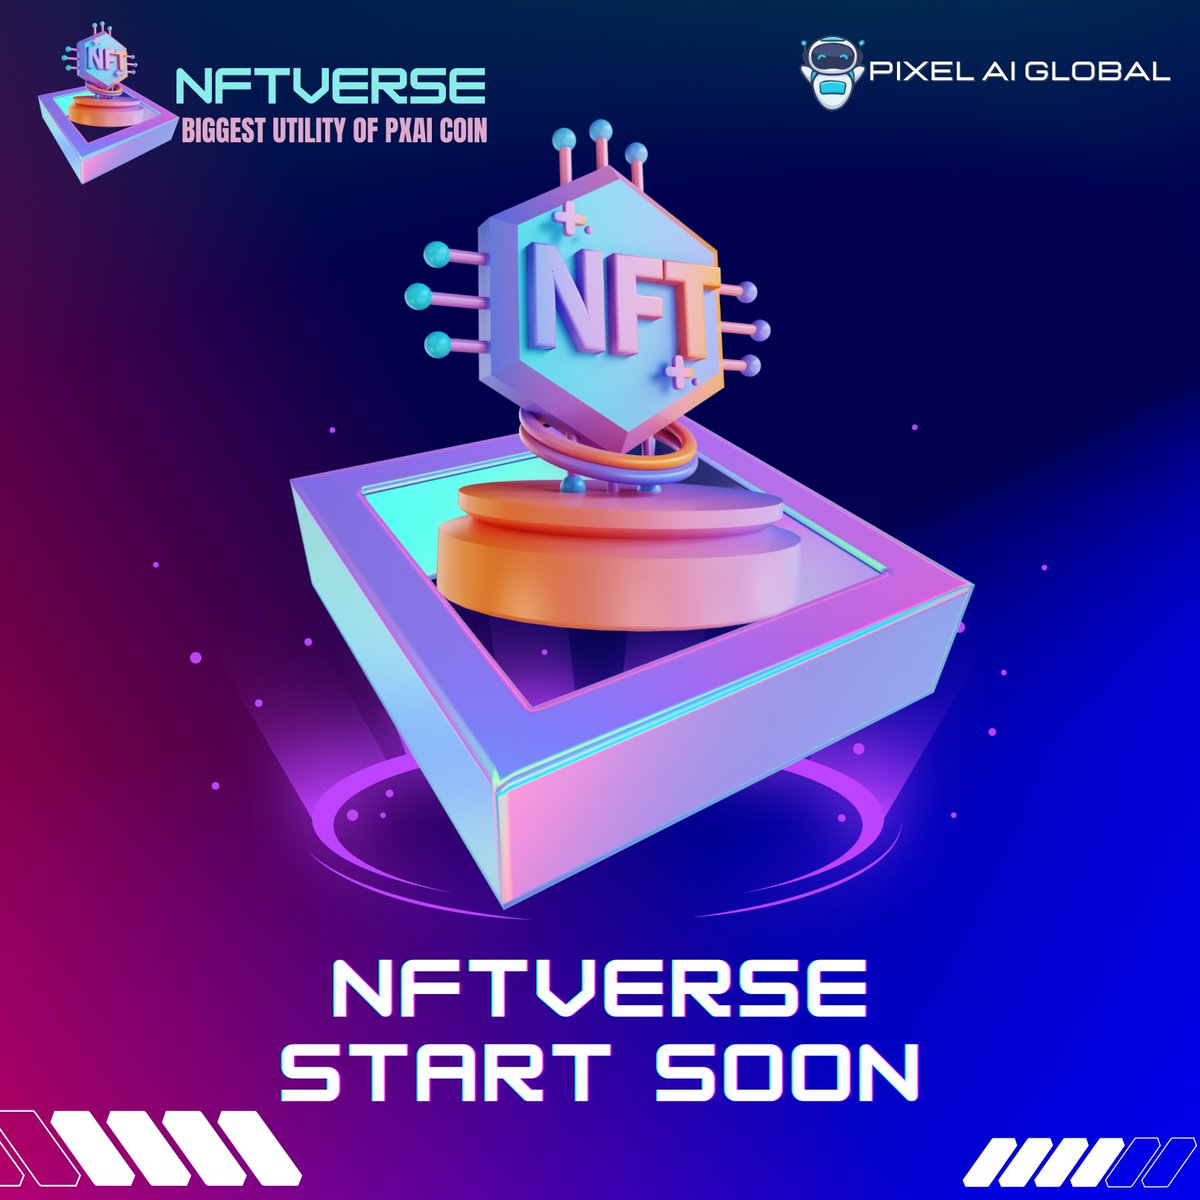 🚀 NFTVERSE - Earning Station For Earn More NFT's
Earn more PXAI coins with PixelAi Global's new opportunity! 🚀
Stay tuned for further details and start boosting your PXAI coin balance today! 💰✨ #PXAI #NFTverse #OpportunityKnocks
#PixelAiGlobal #PXAI #Rewards #Opportunity